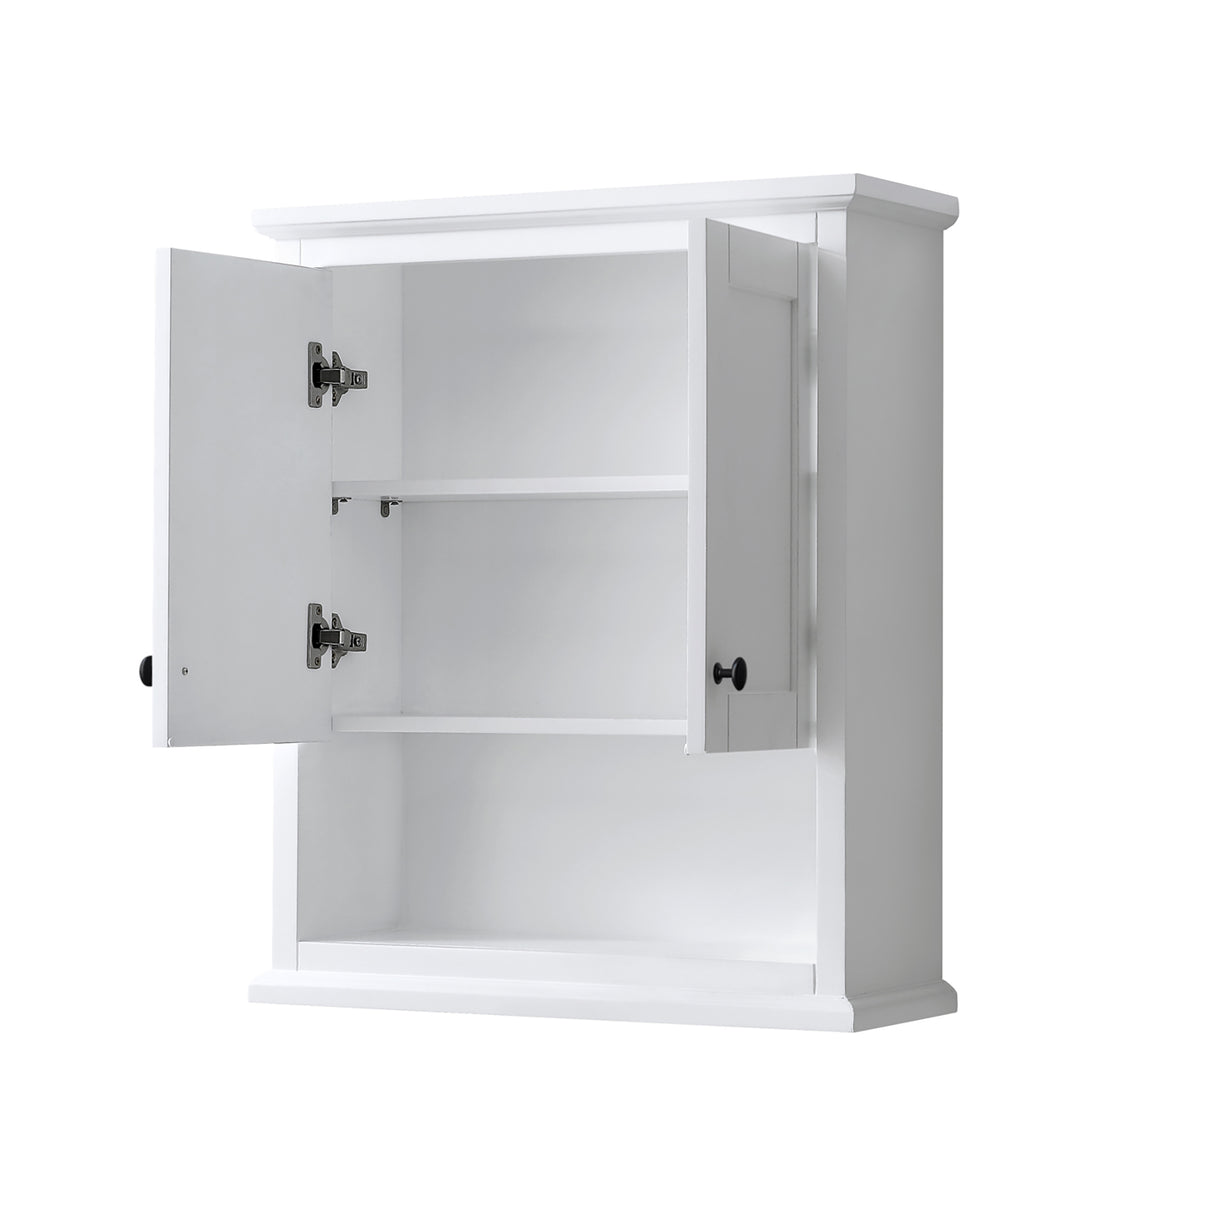 Avery Over-the-Toilet Bathroom Wall-Mounted Storage Cabinet in White with Matte Black Trim